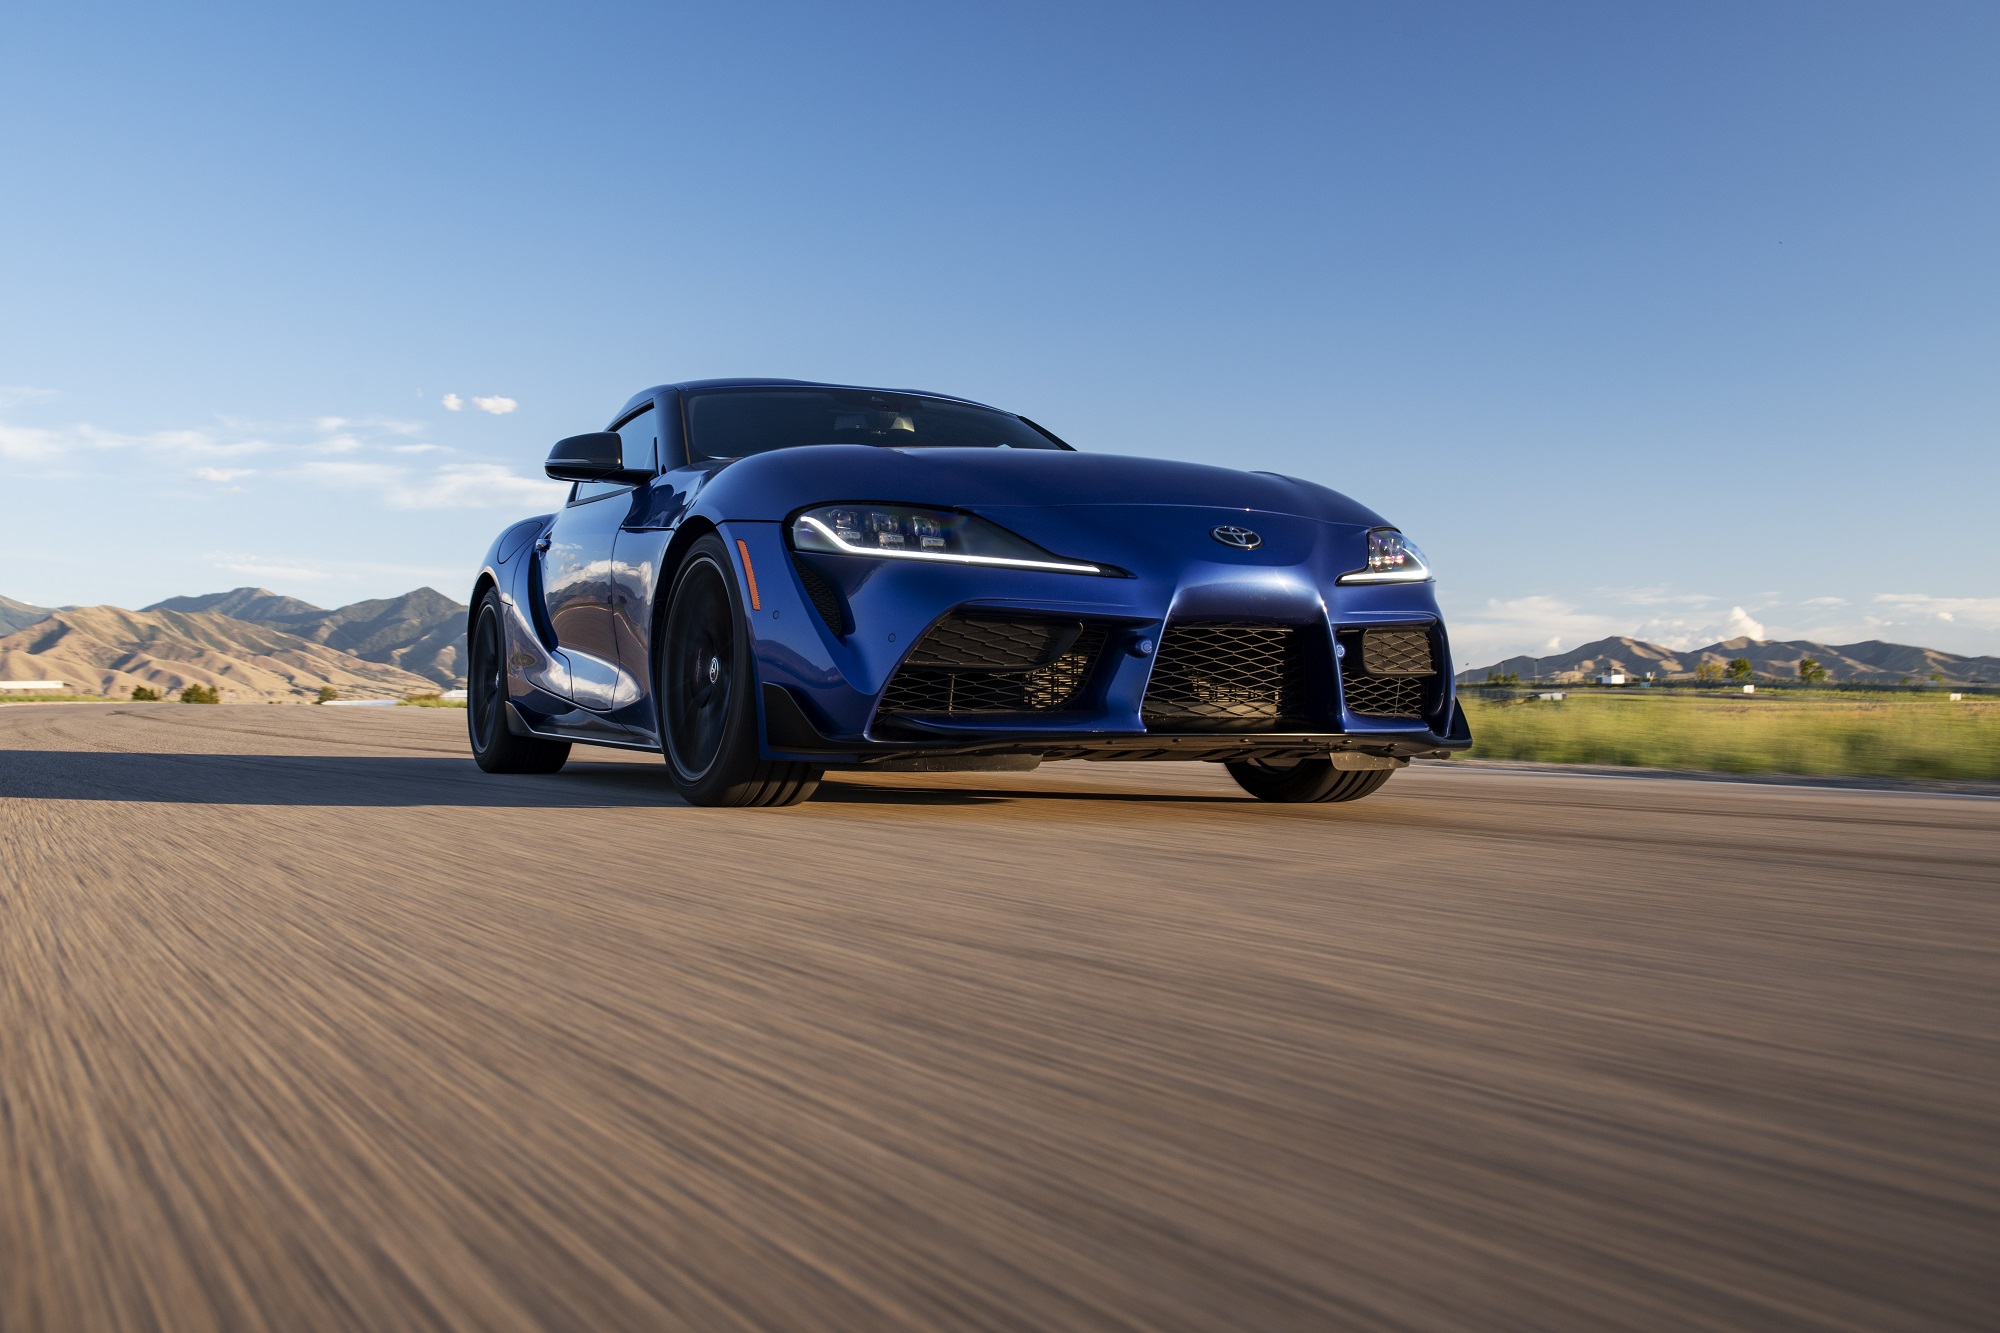 The Toyota GR Supra 3.0 is a fast, light, track-ready sports car alternative to the GT350.